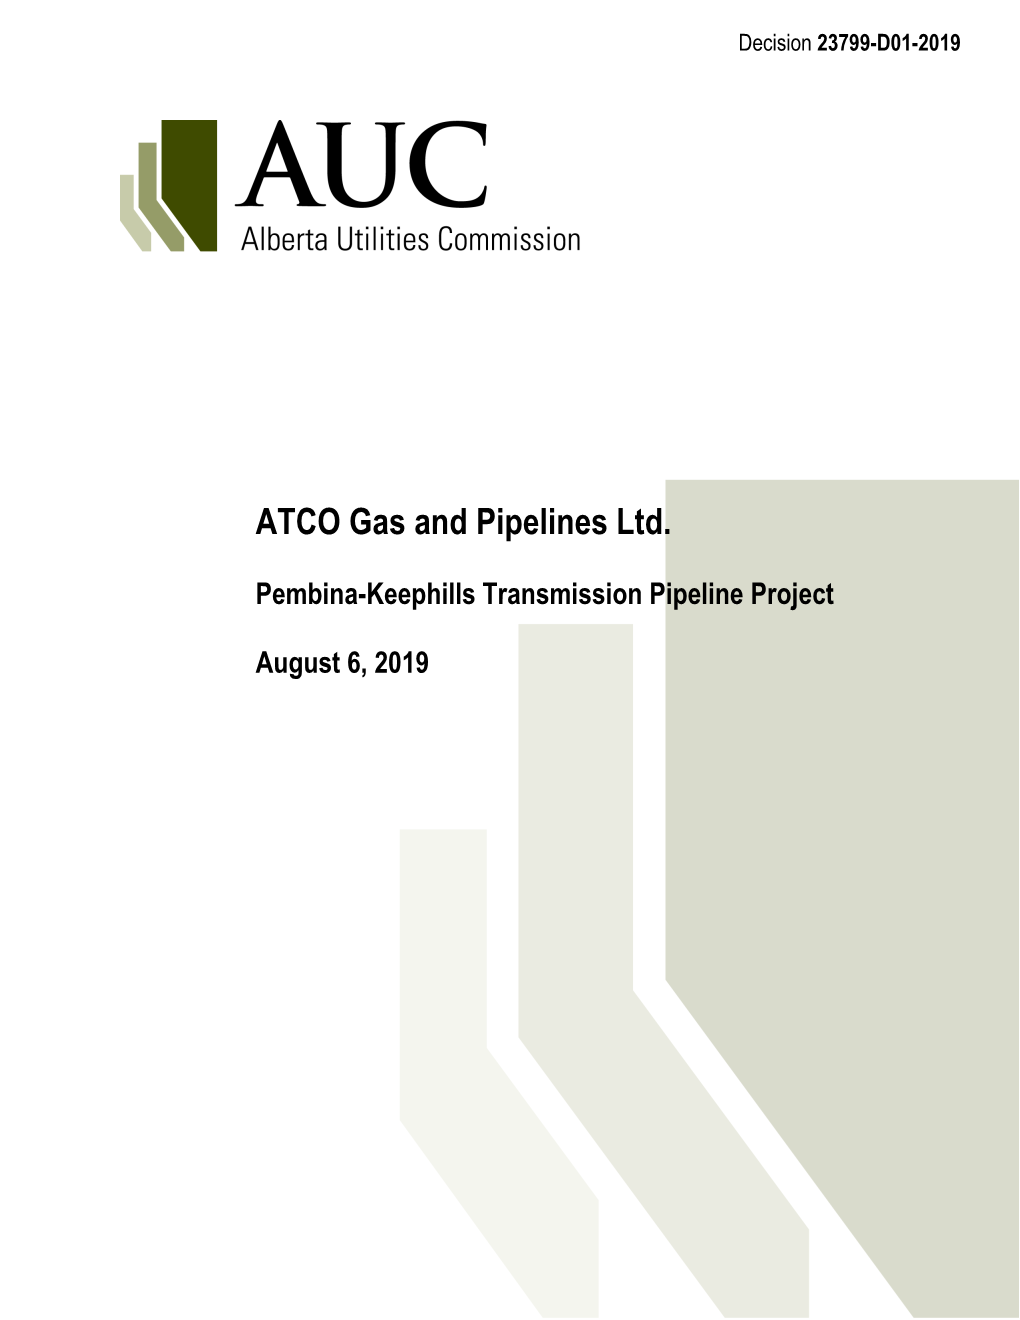 Pembina-Keephills Transmission Pipeline Project August 6, 2019